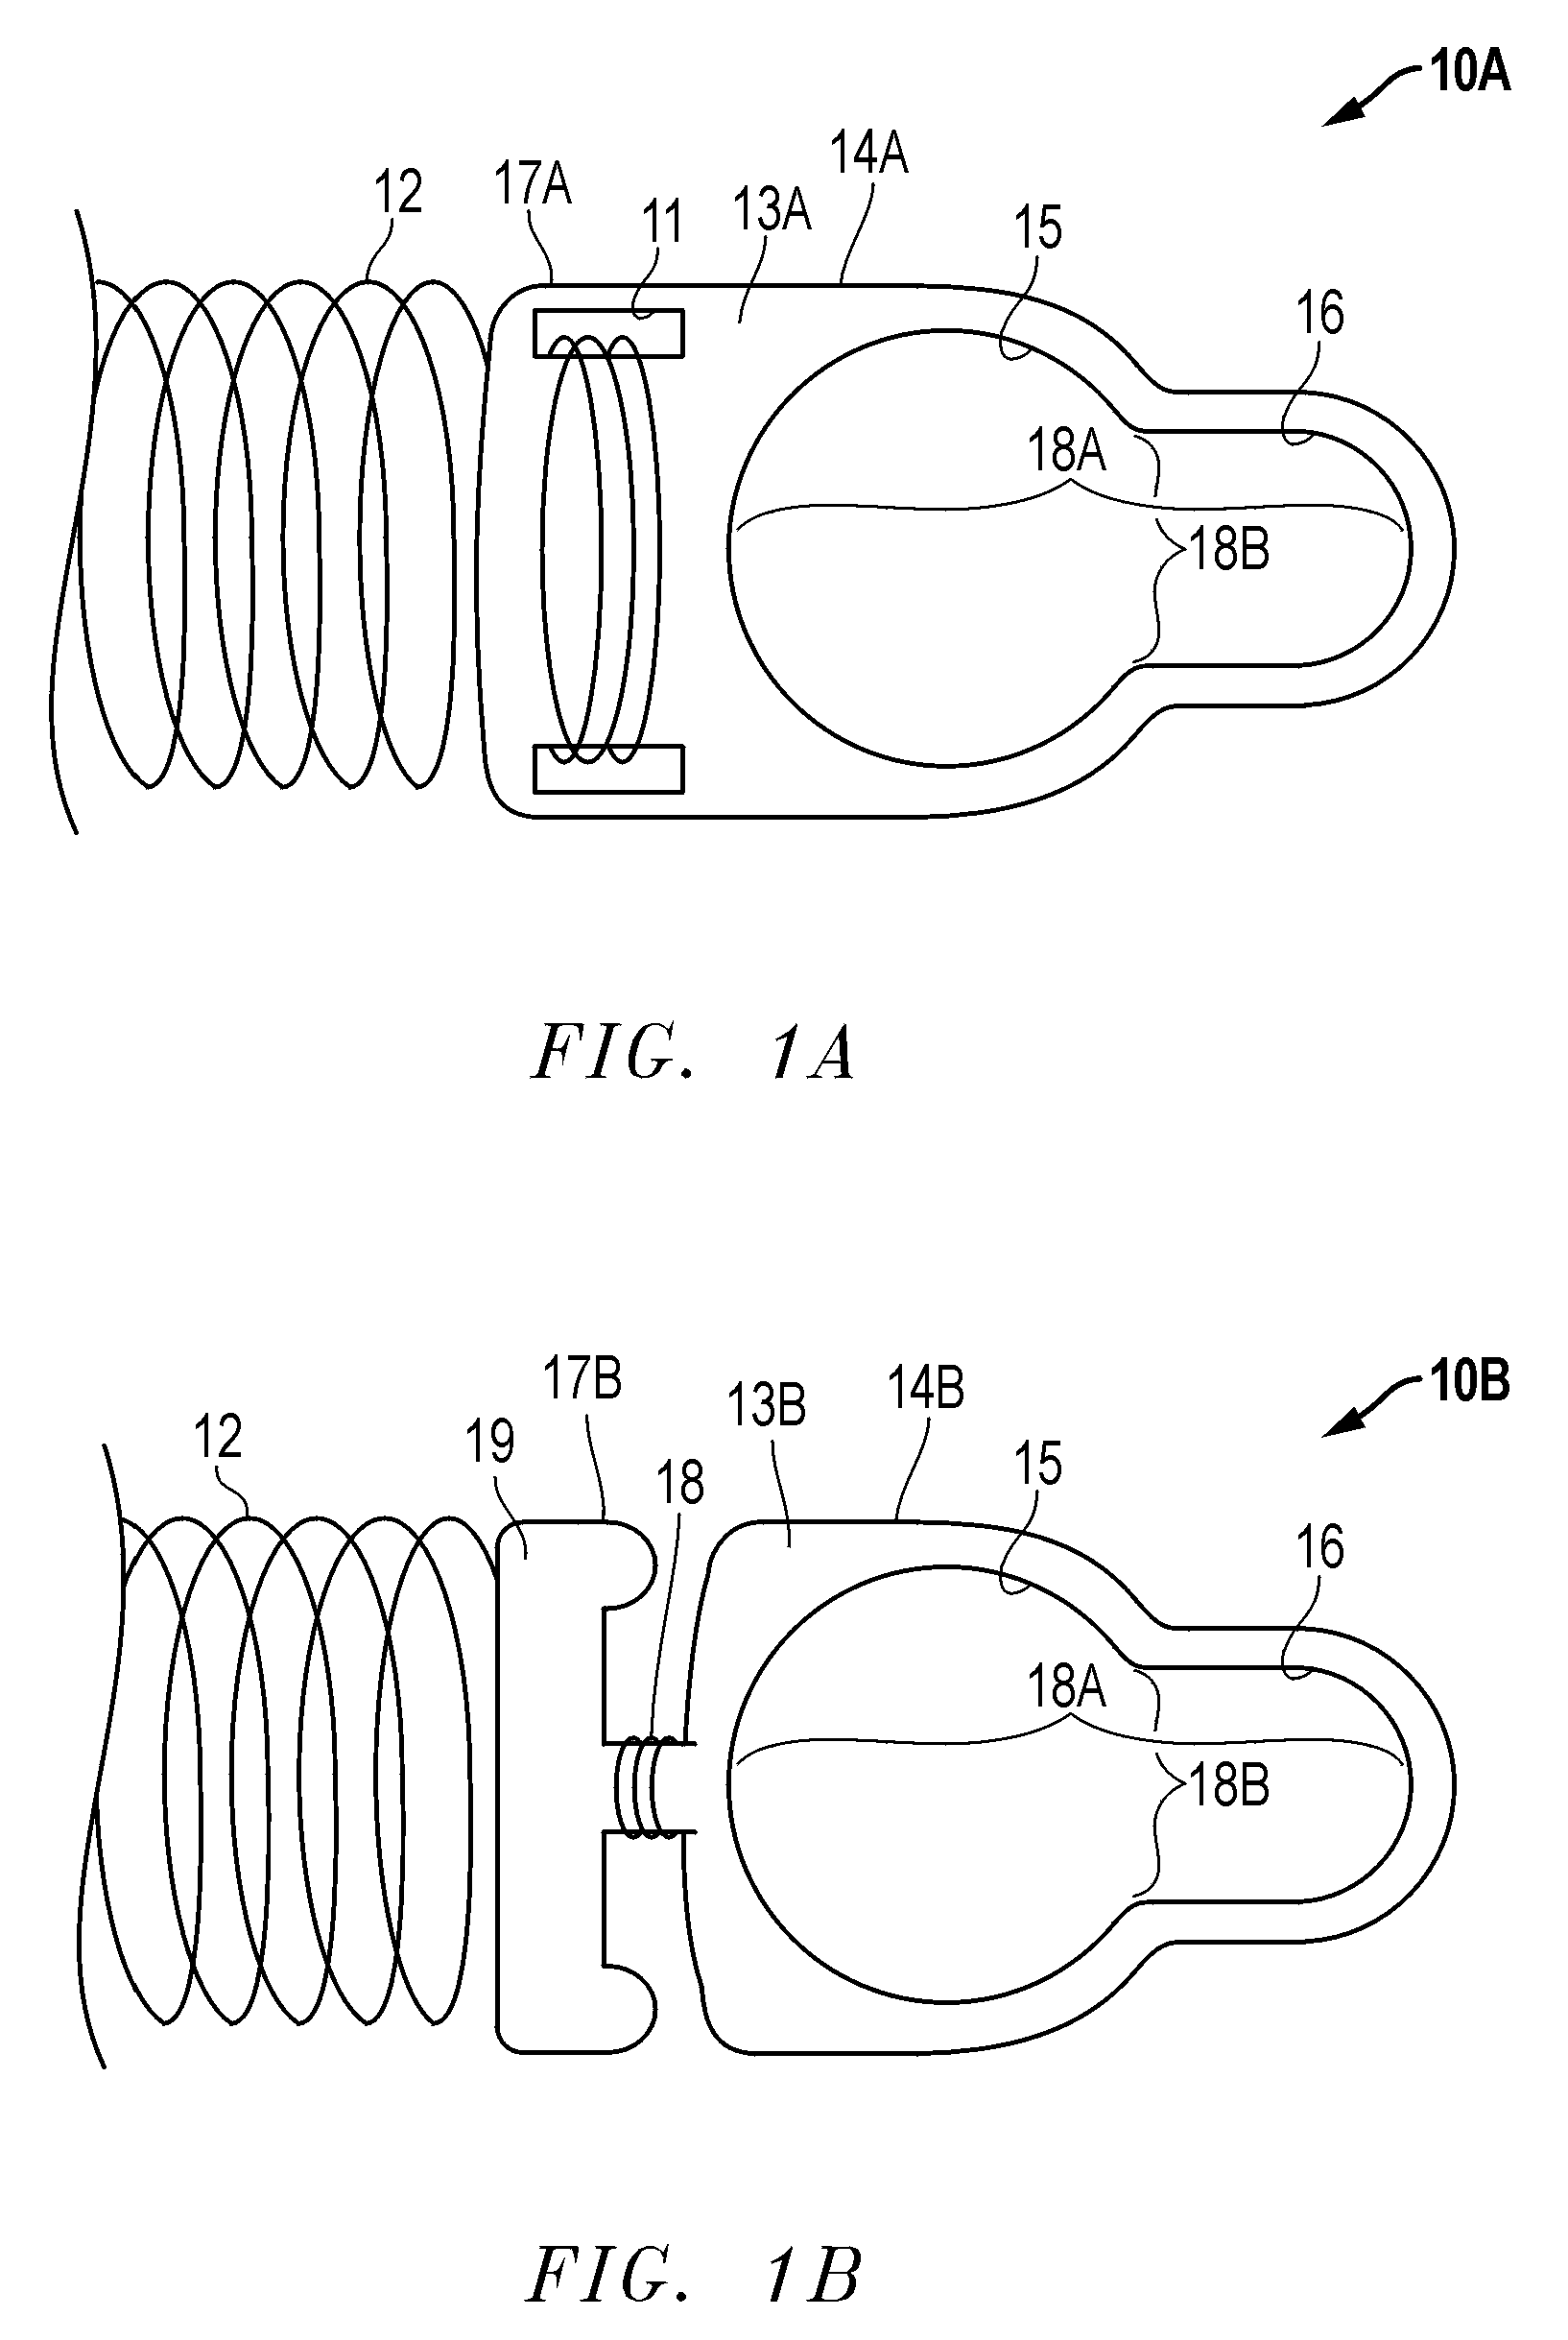 Orthodontic closed coil spring assembly and method of use thereof